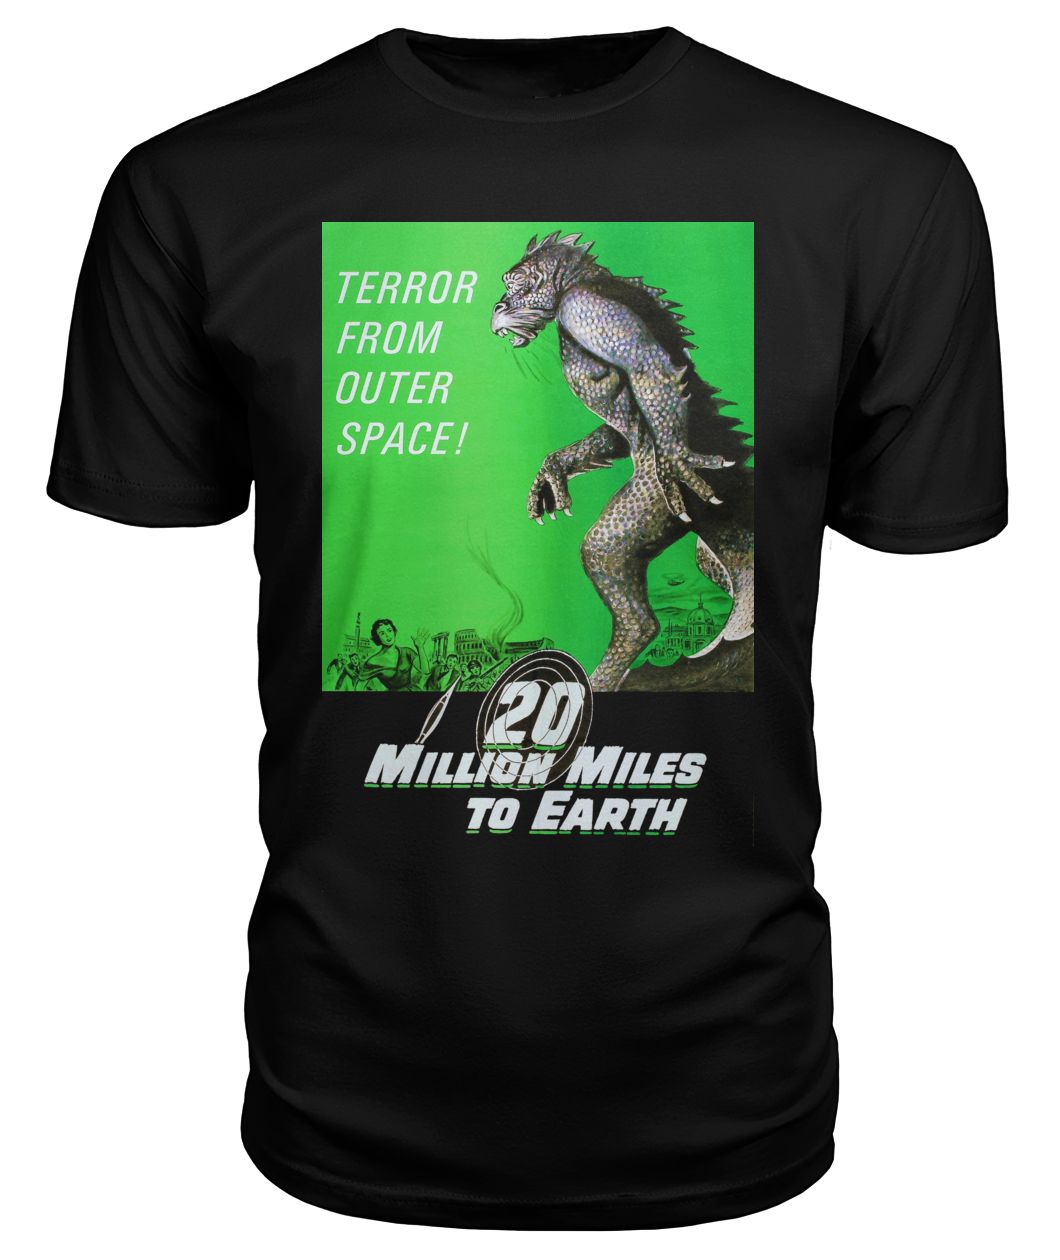 20 Million Miles to Earth t-shirt